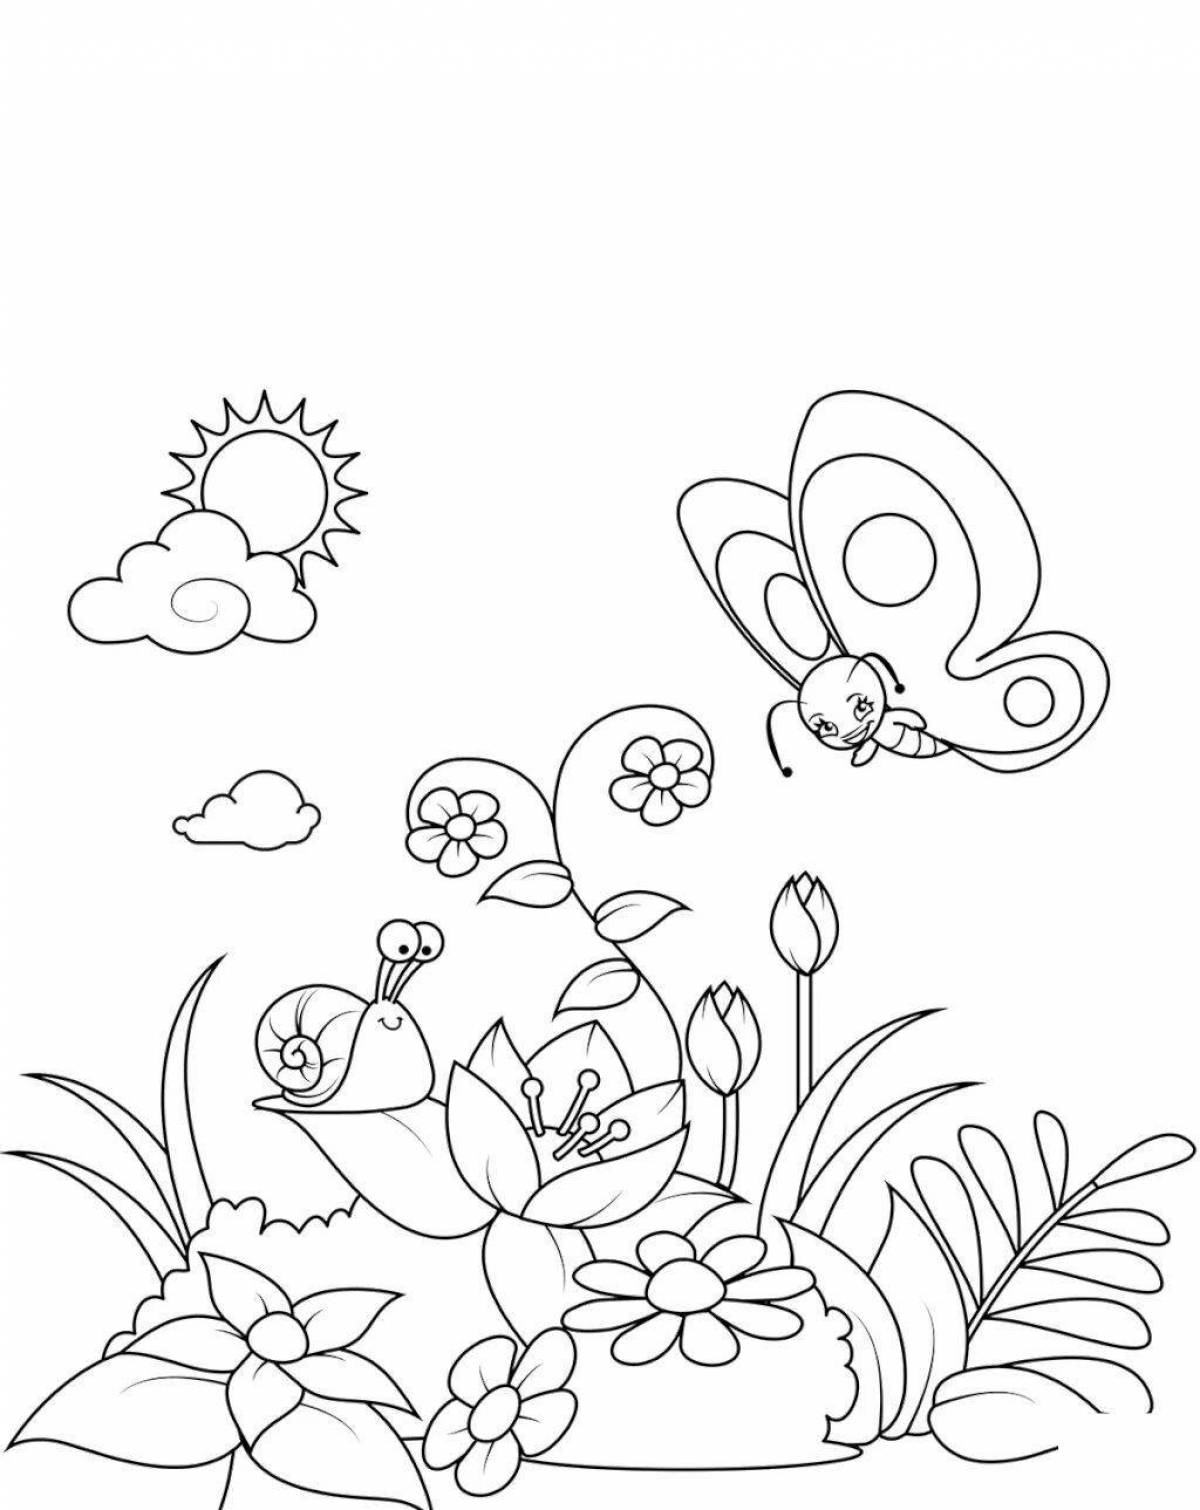 Coloring sunny meadow for children